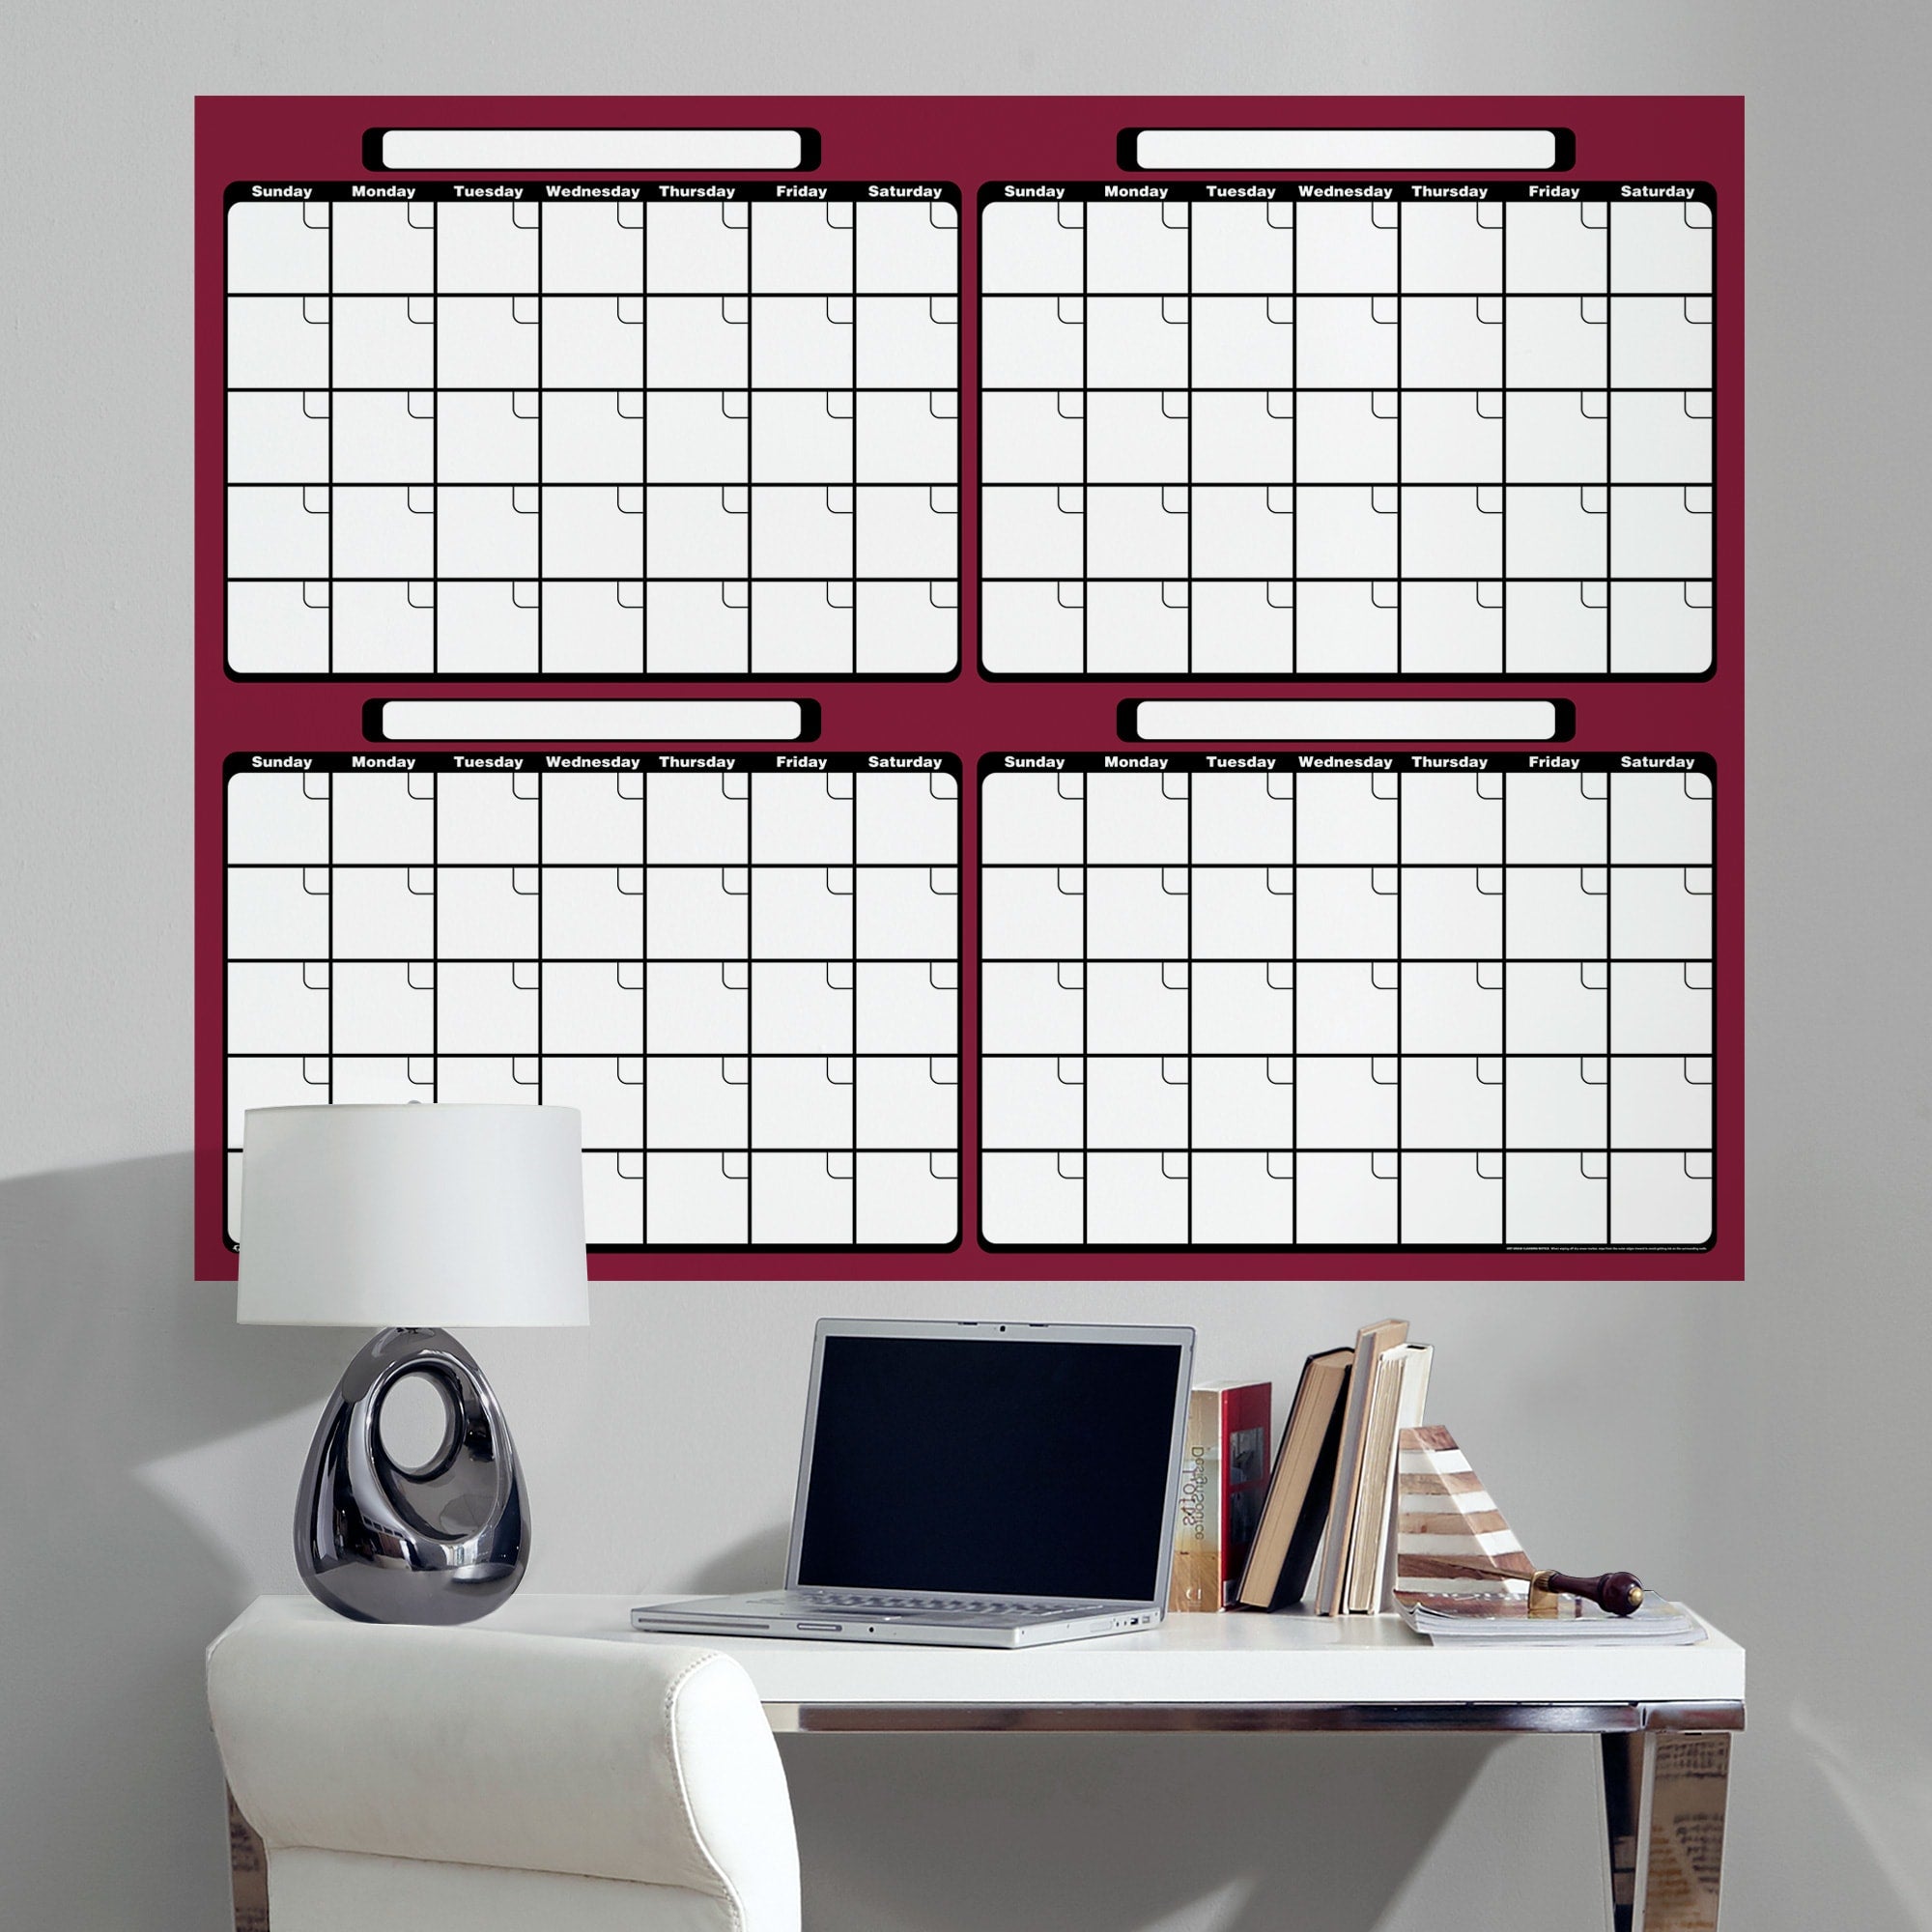 Four Month Calendar - Removable Dry Erase Vinyl Decal in Burgundy/Black (52"Wx39.5"H) by Fathead